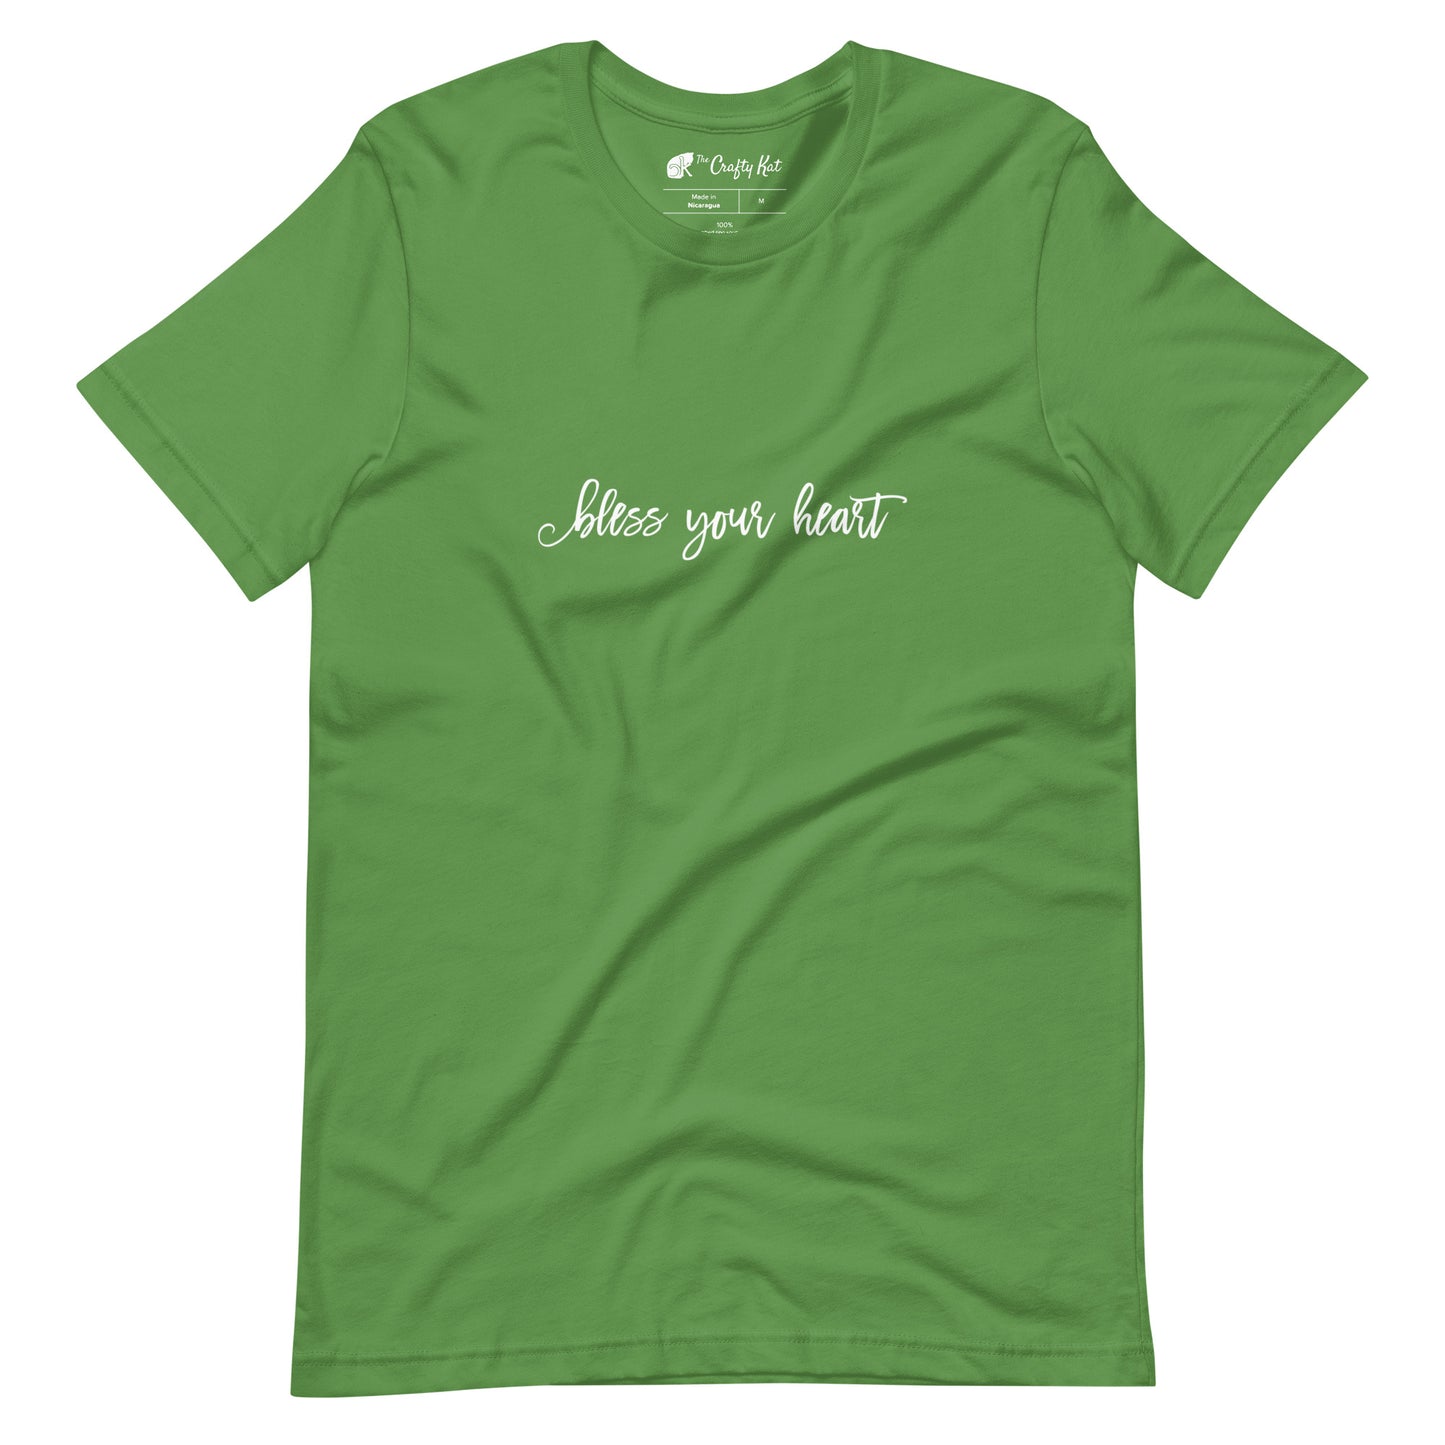 Leaf green t-shirt with white graphic in an excessively twee font: "bless your heart"